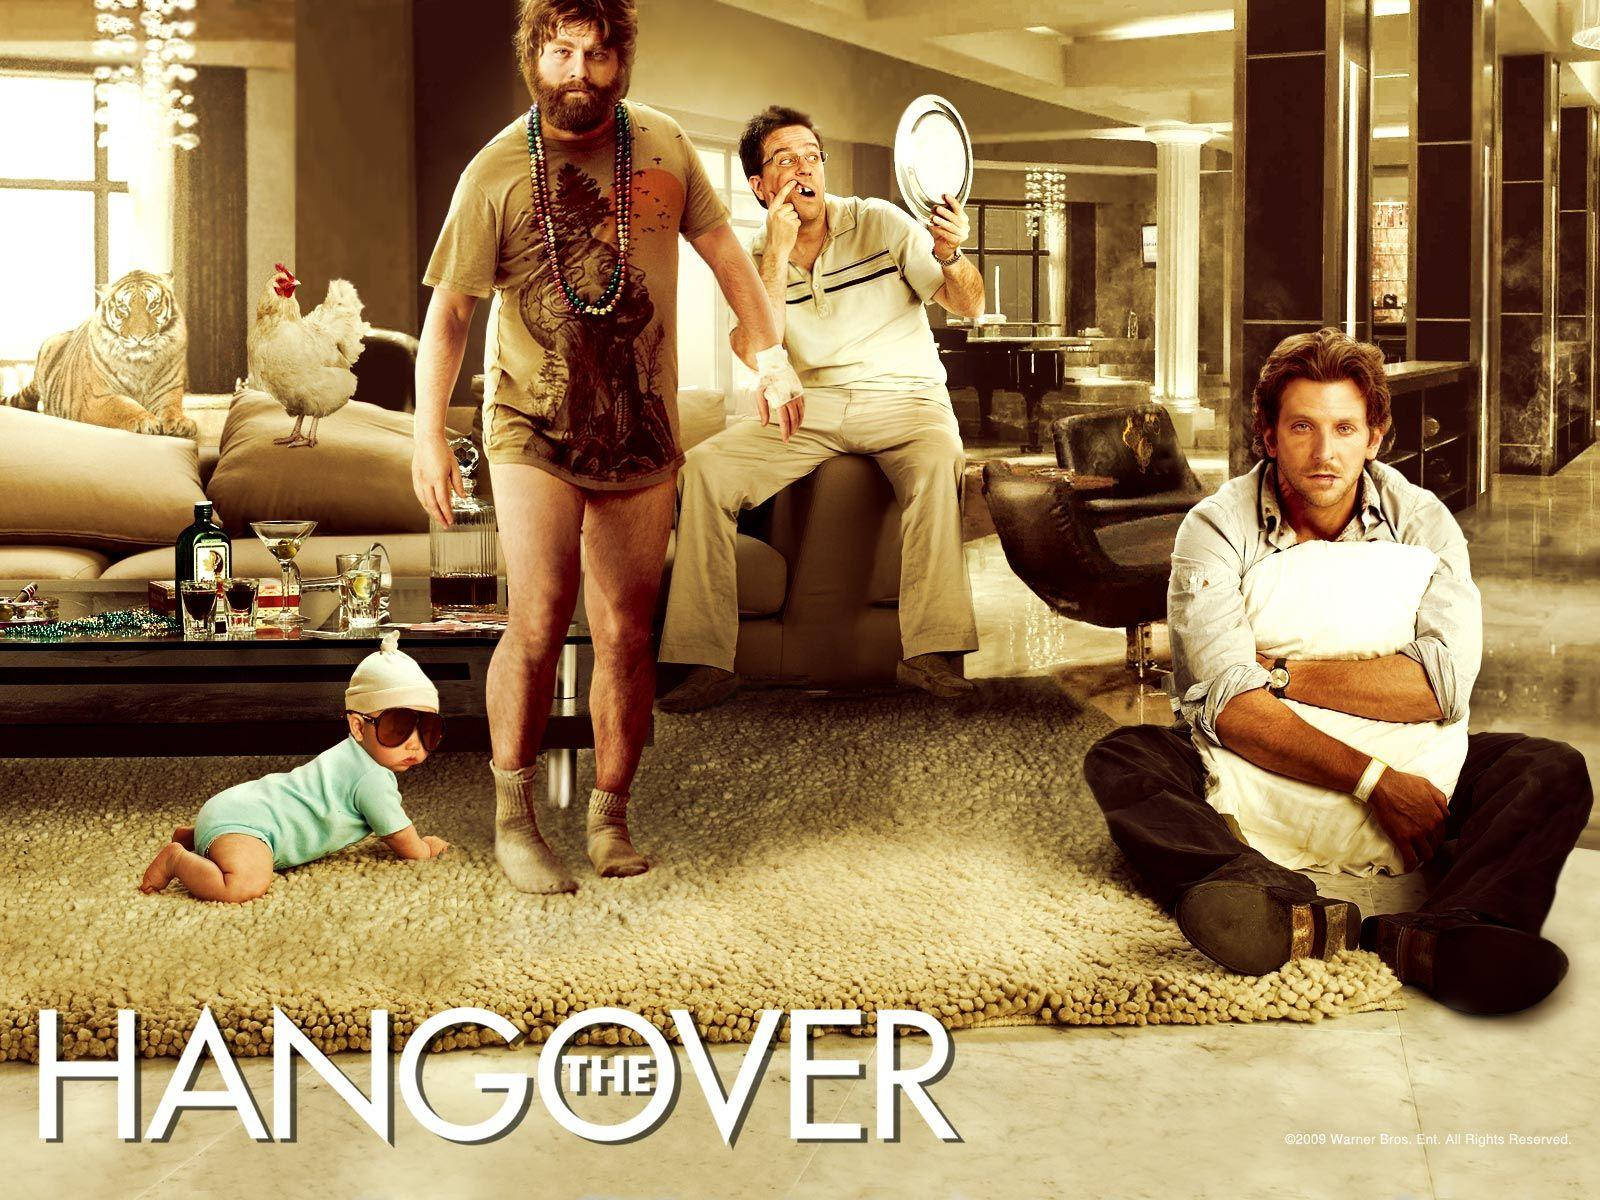 The Hangover Movie Poster Funny Photoshoot Wallpaper